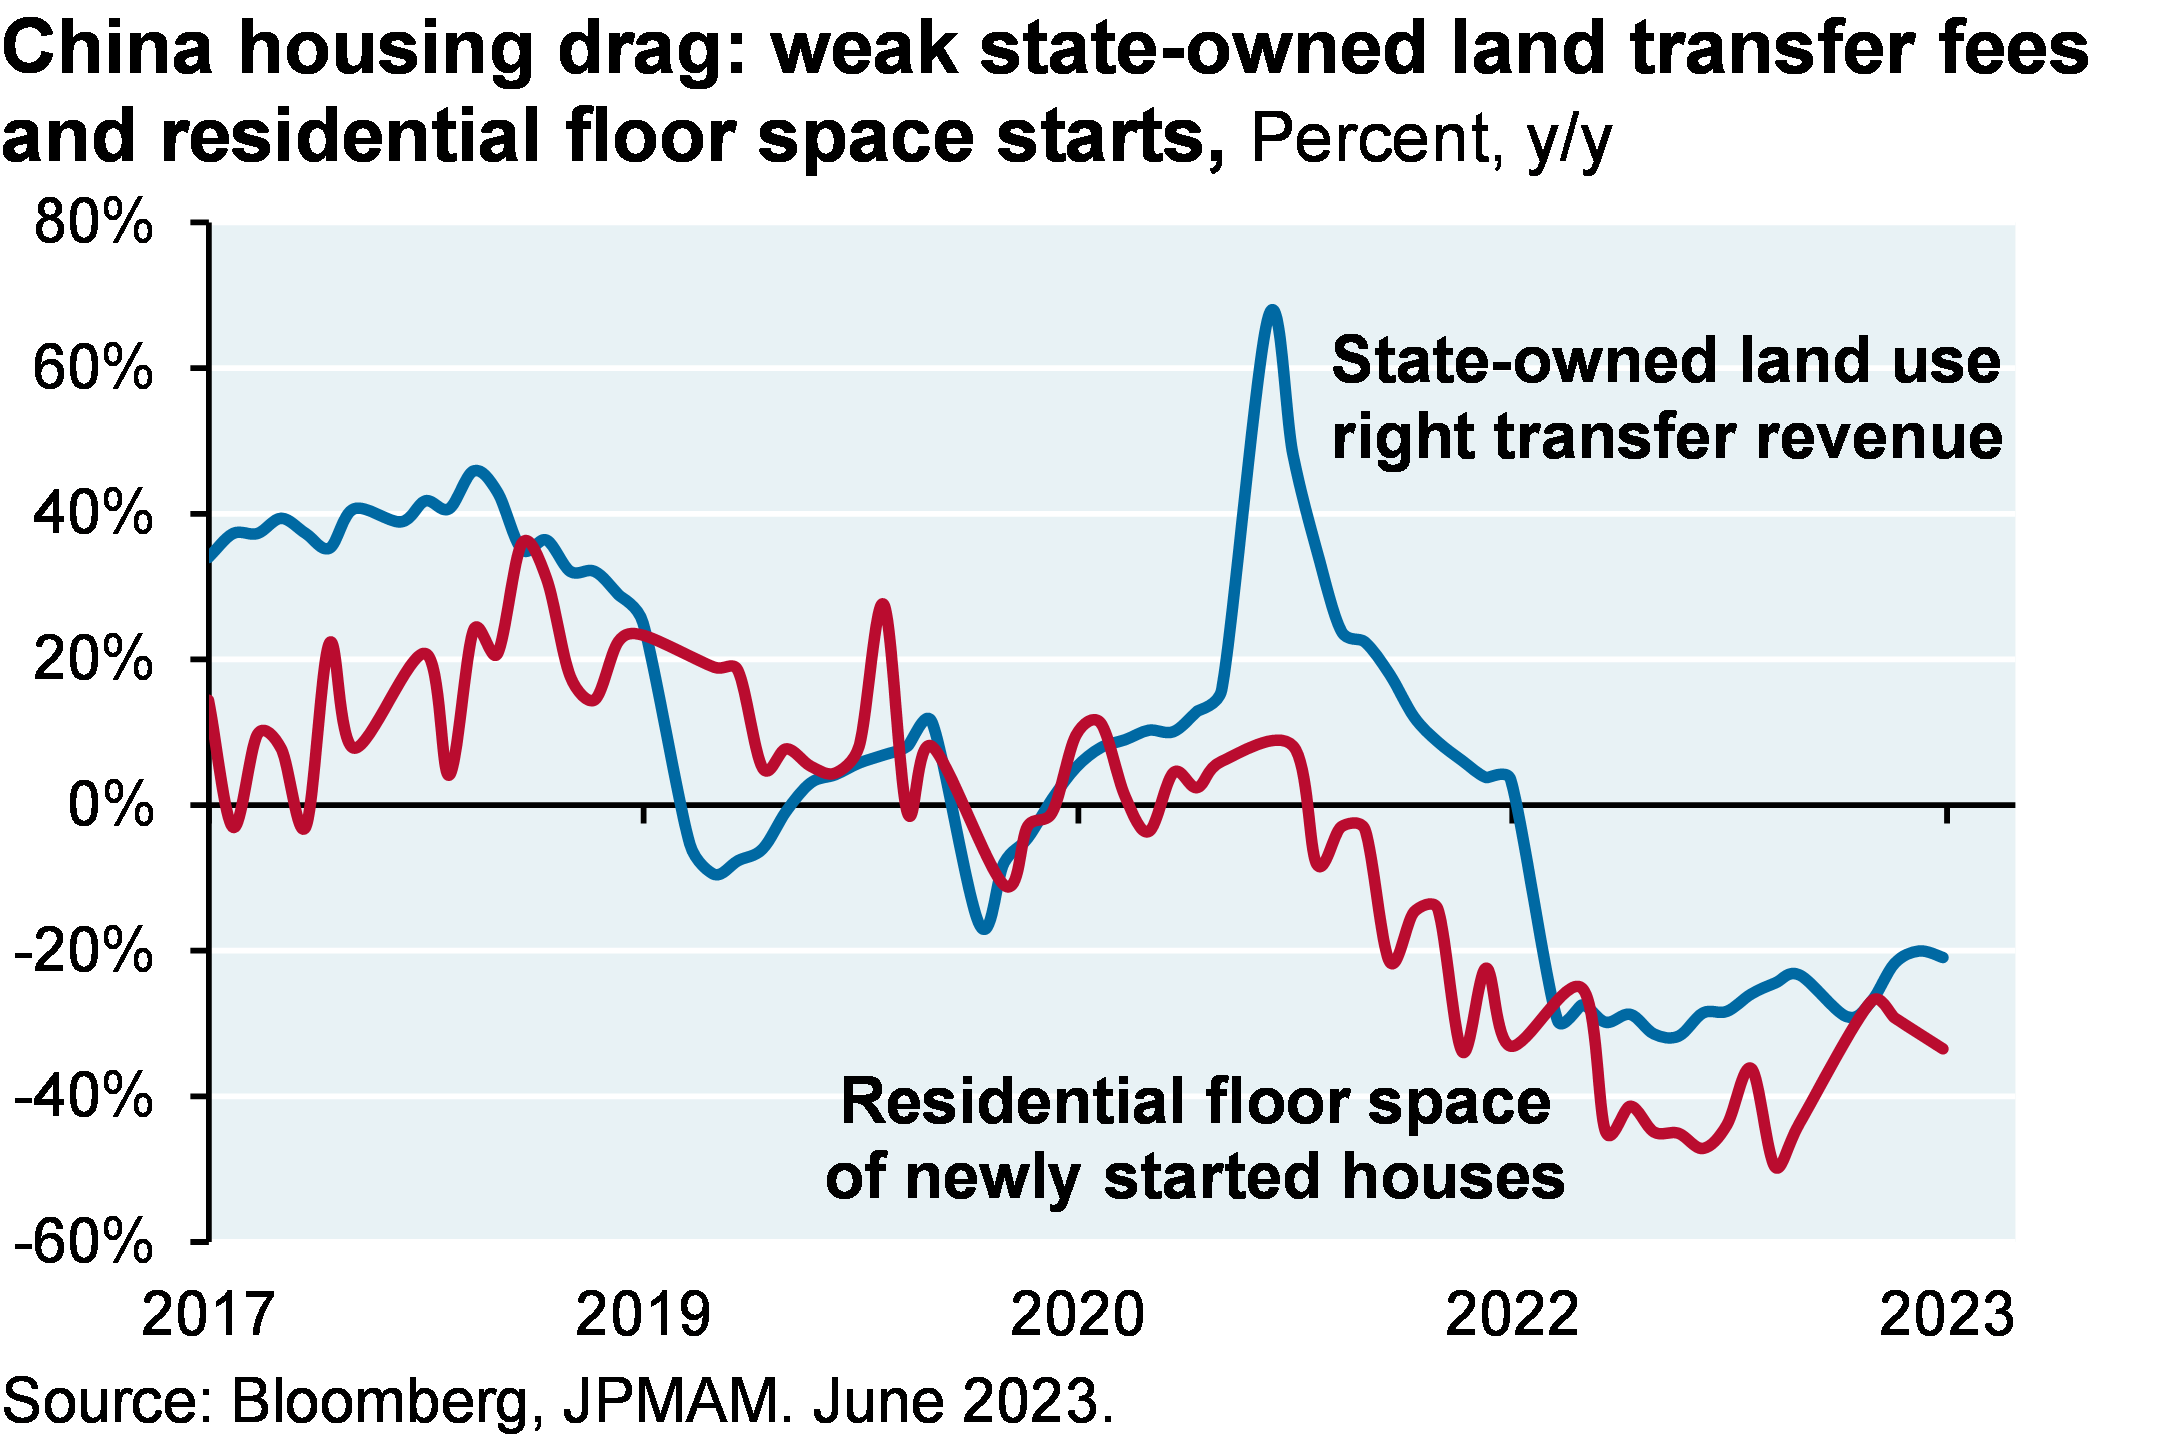 Line chart shows the y/y growth of China’s residential floor space of newly started houses. It also shows the y/y growth of China state-owned land use right transfer revenue. Both have declined notably to negative 20-30%.